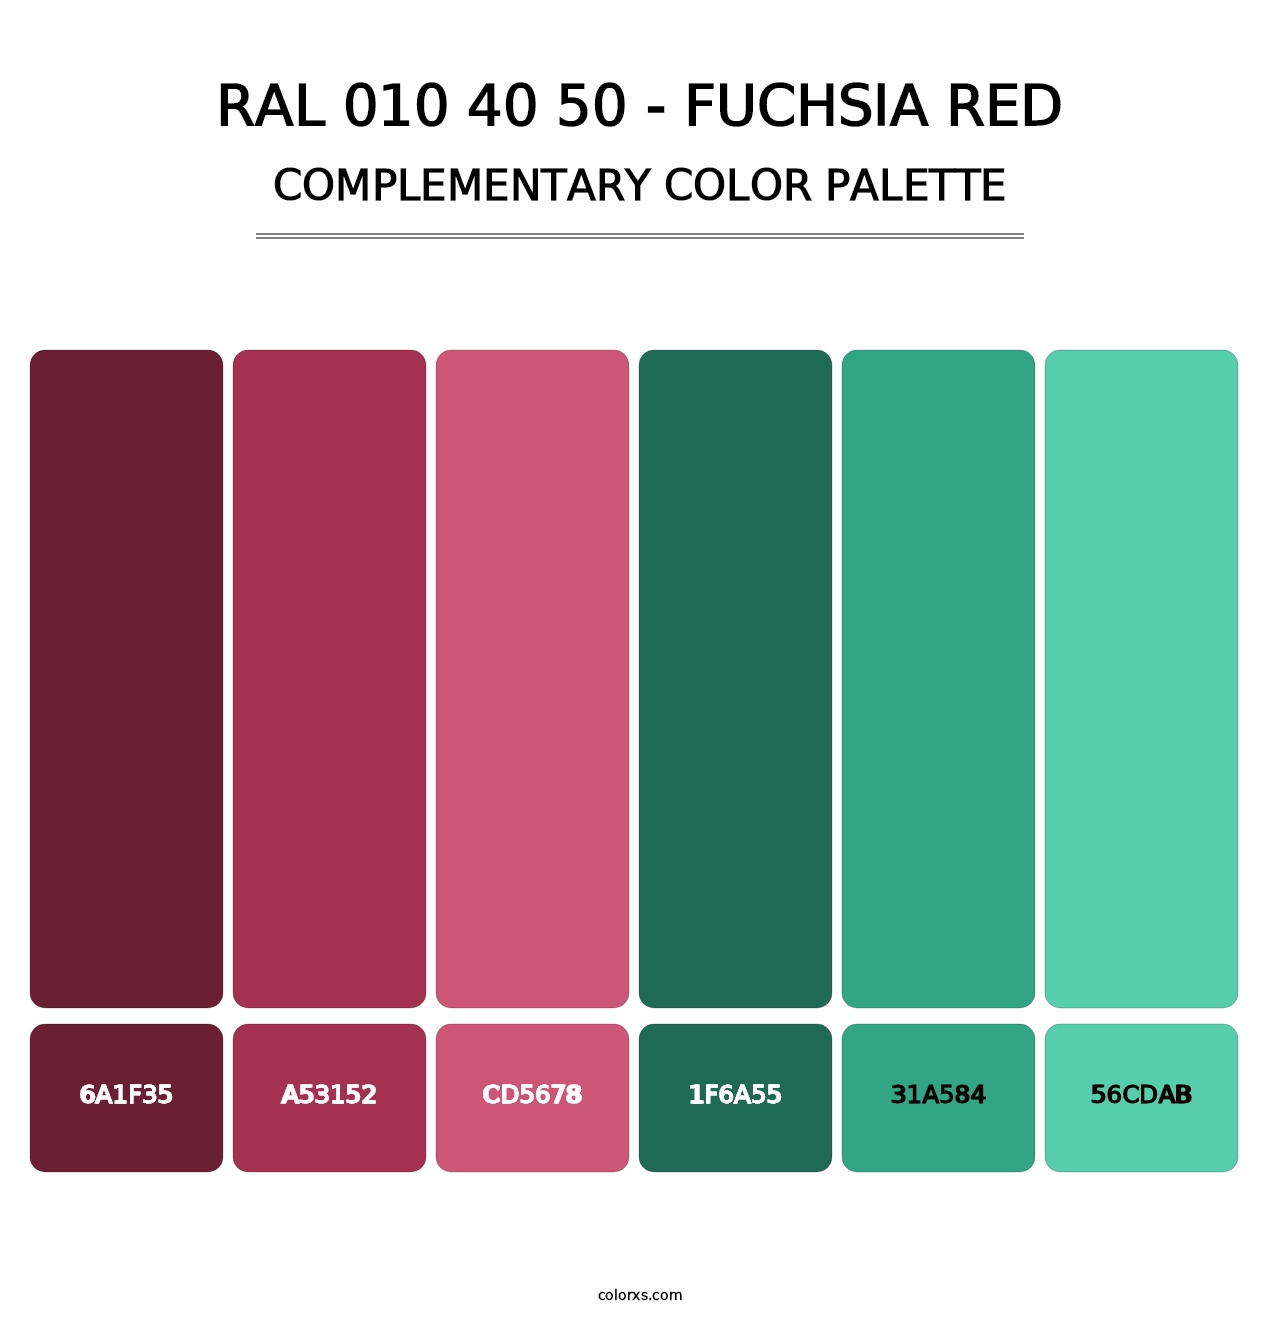 RAL 010 40 50 - Fuchsia Red - Complementary Color Palette